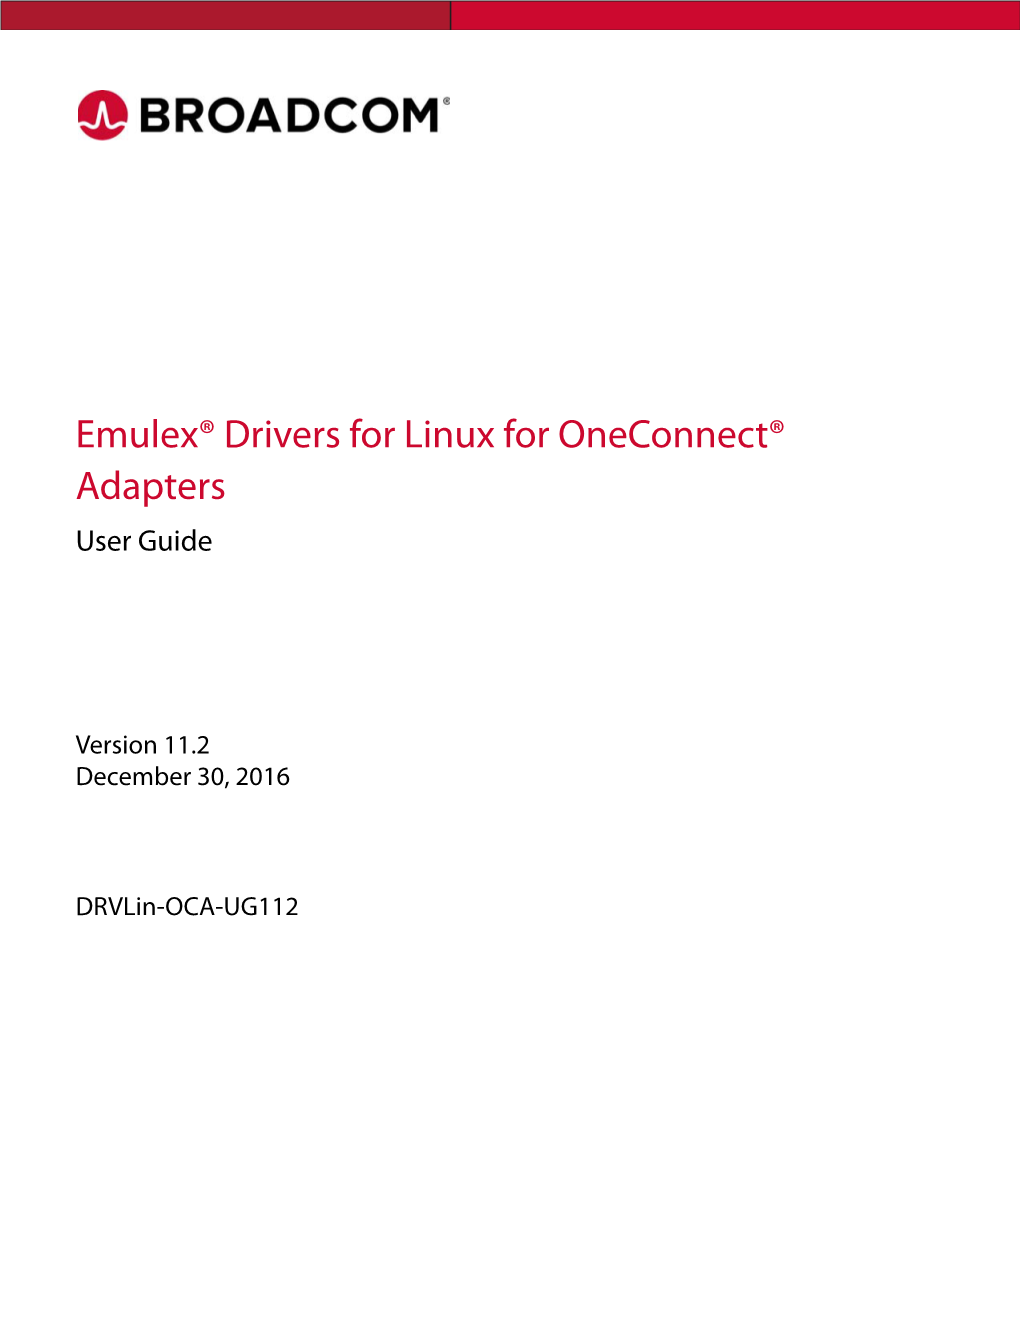 Emulex Drivers for Linux for Oneconnect Adapters User Guide December 30, 2016